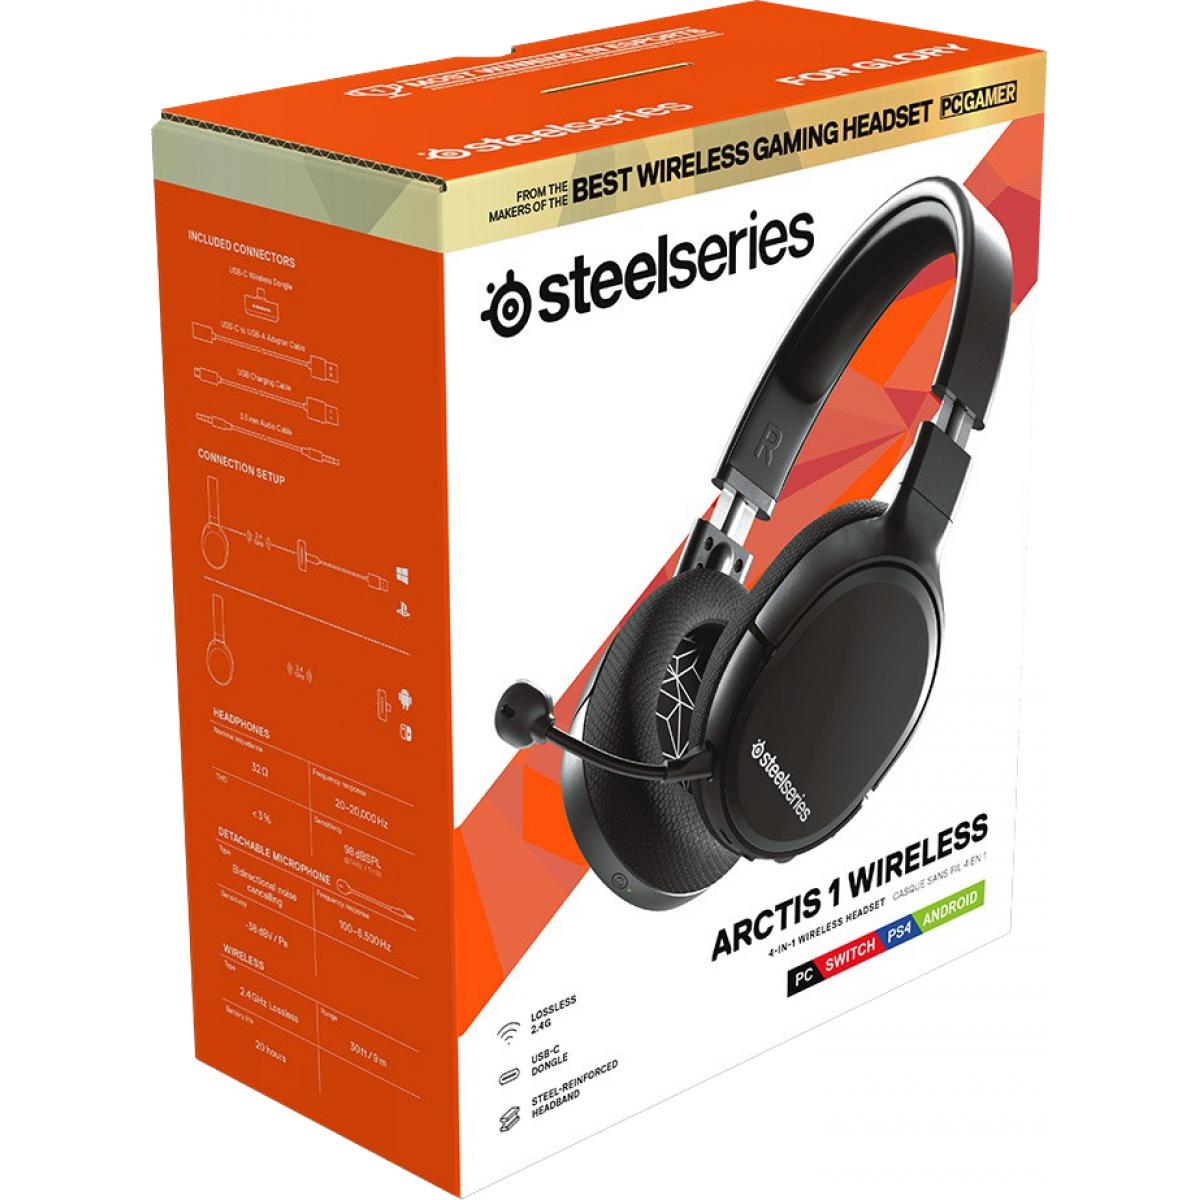 Steelseries Arctis 1 Wireless Gaming Headset Detachable Clearcast Microphone For Pc Ps4 Ps5 Xbox Arctis 1 Wireless Os Jordan